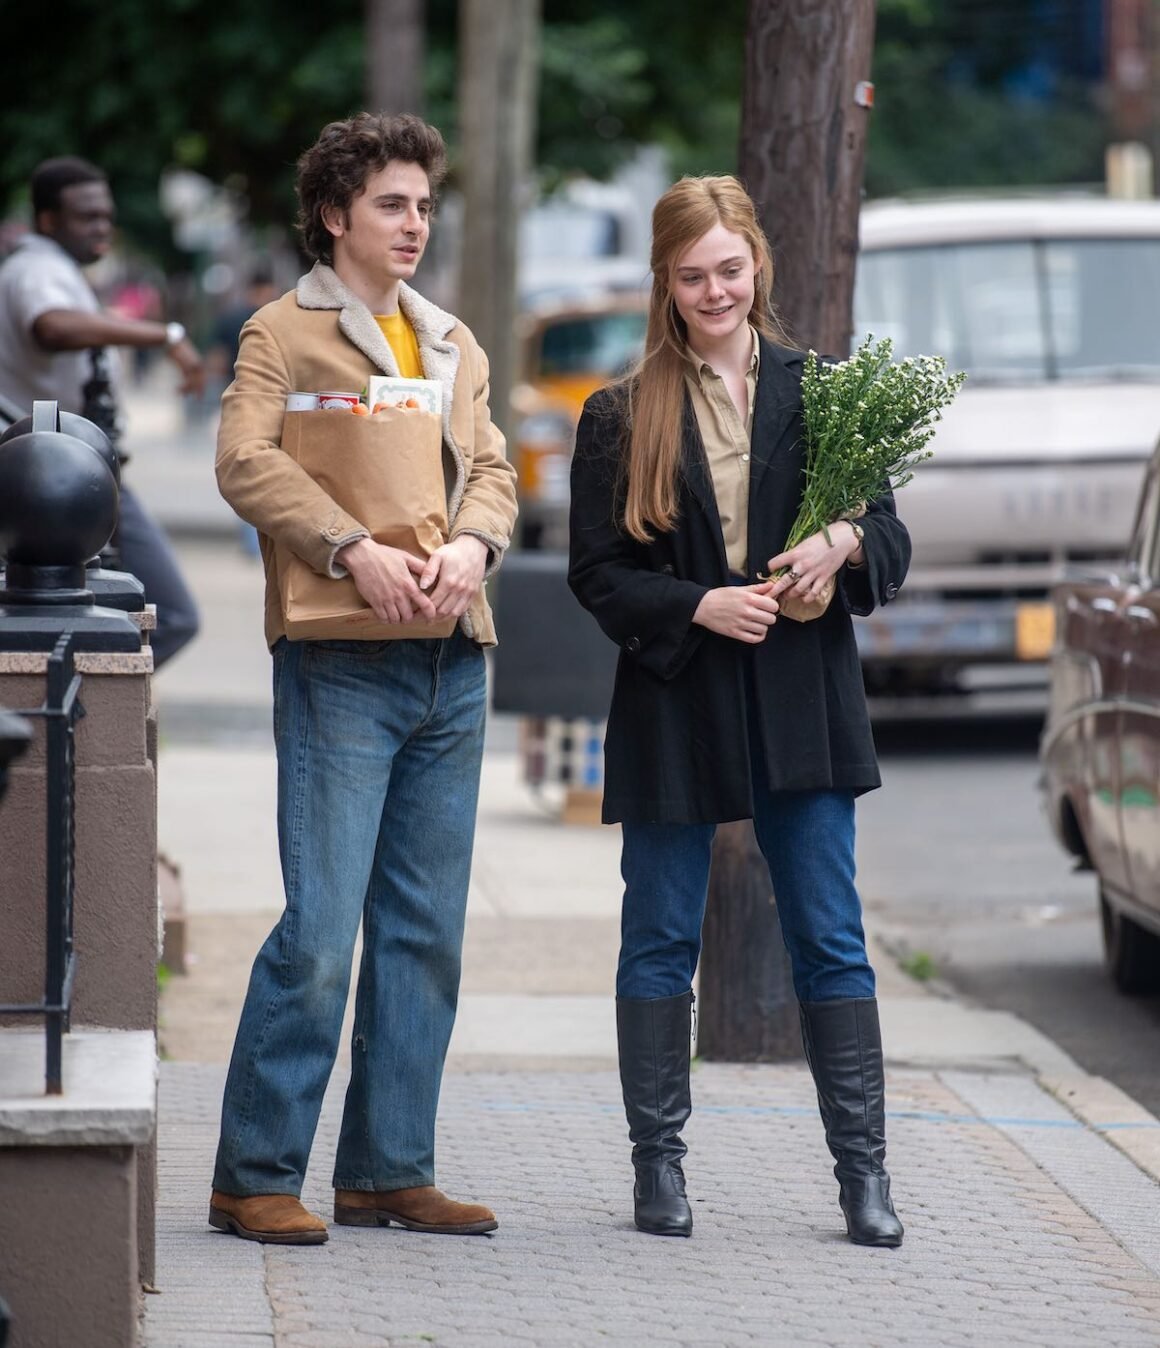 Timothee Chalamet And Elle Fanning Film 'A Complete Unknown' In Hoboken